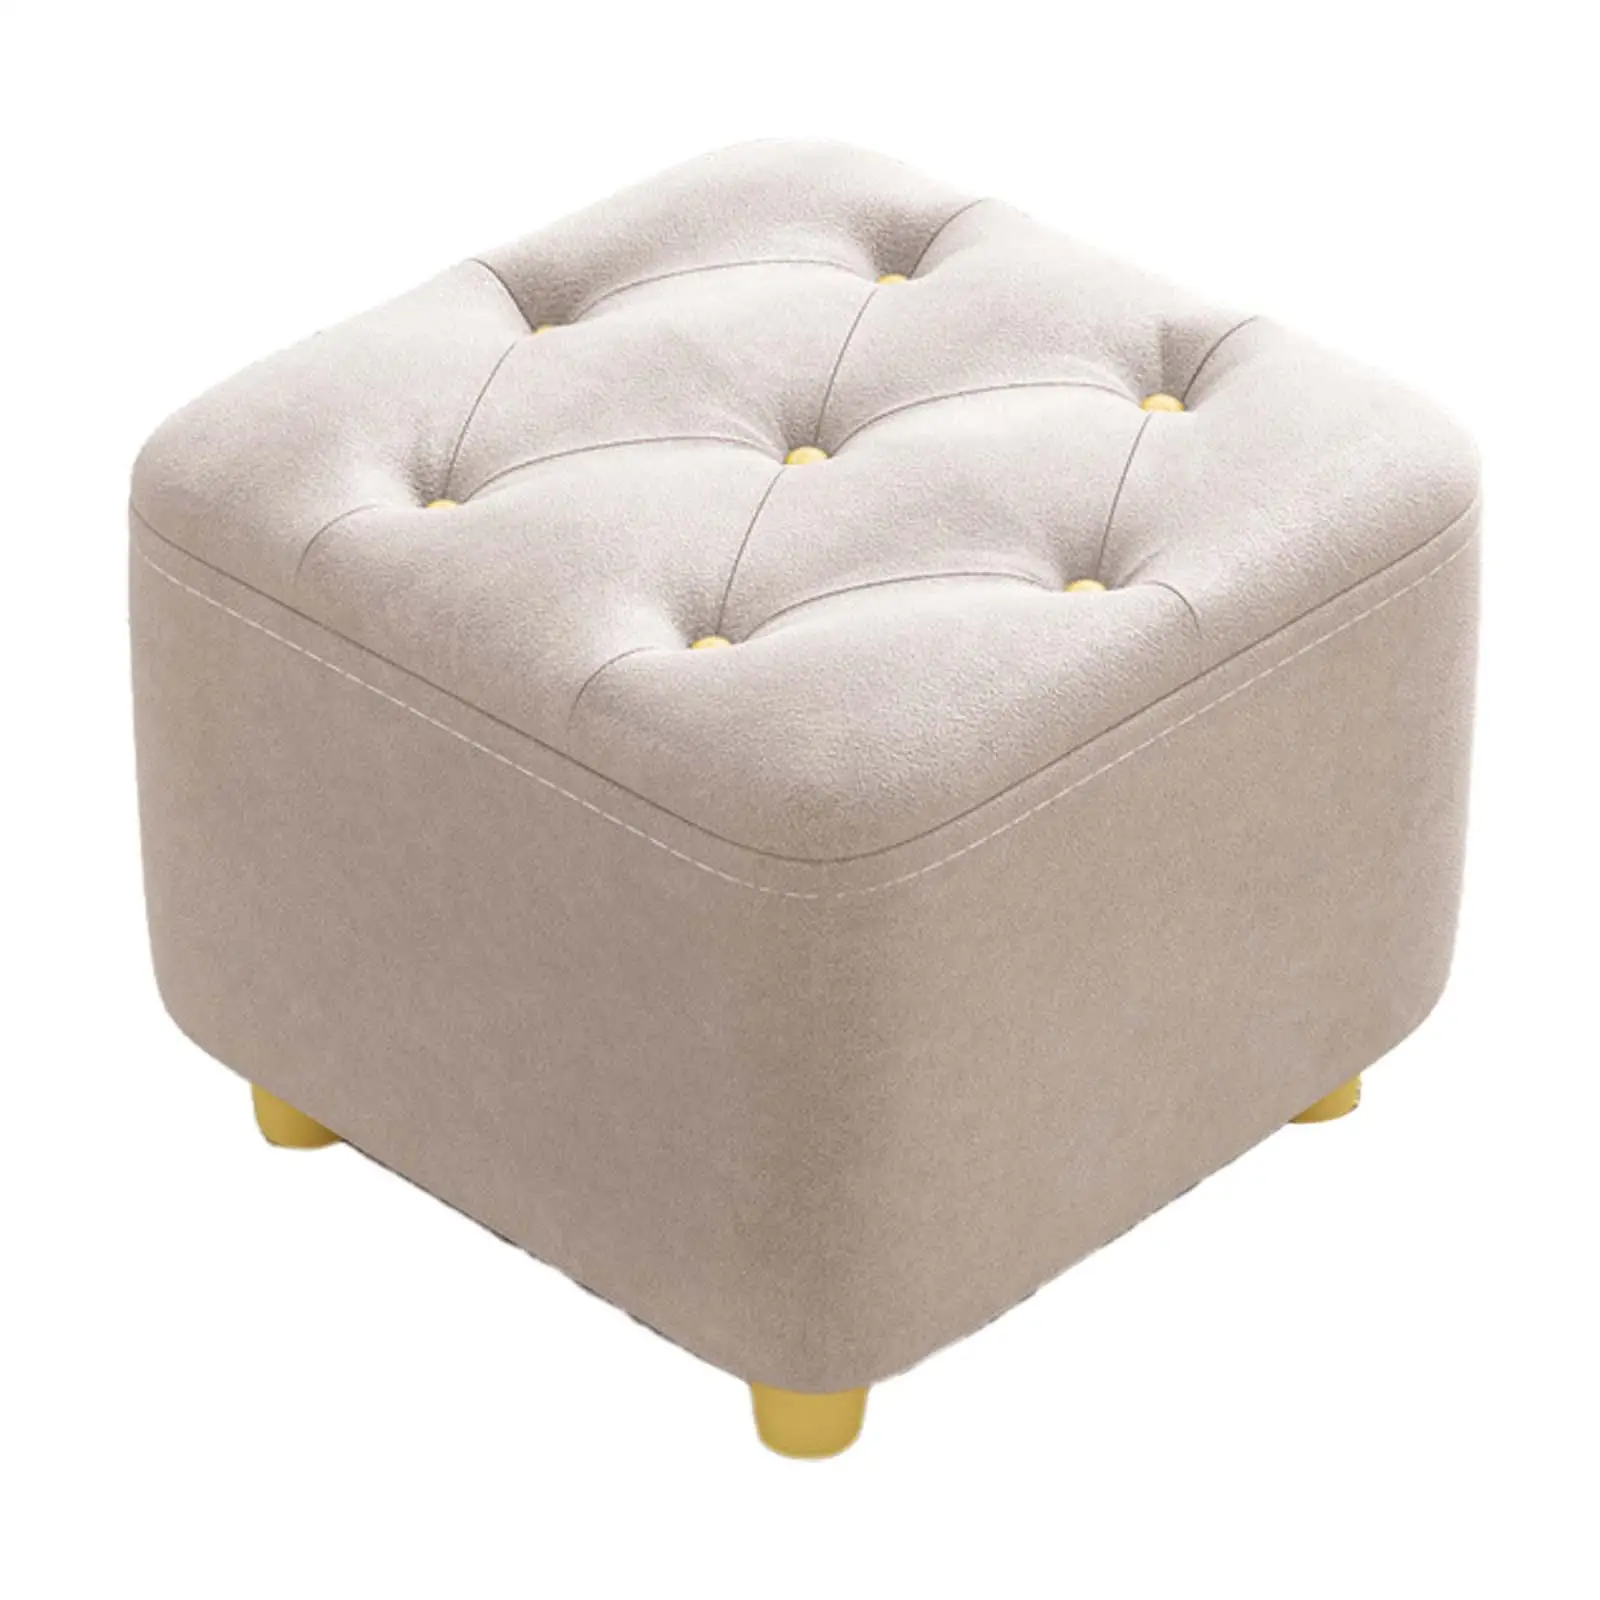 Footrest Square Footstool Non Slip Stylish Creative Comfortable Foot Stool Ottoman Stool for Doorway Entryway Playroom Couch